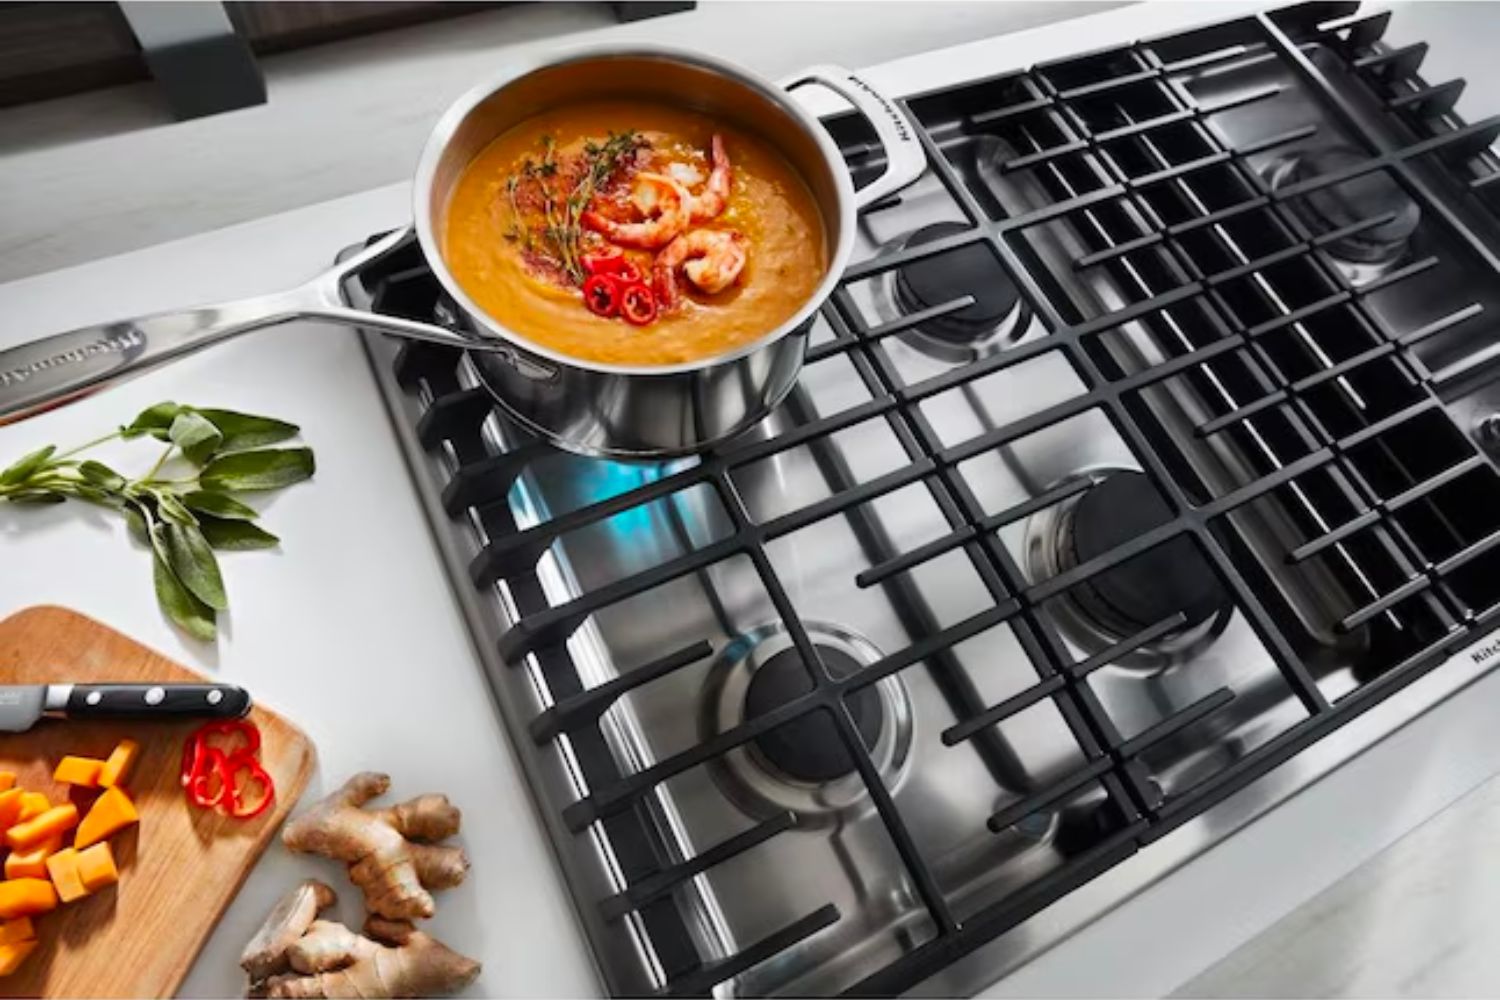 A pot of soup cooks on the best gas cooktop option